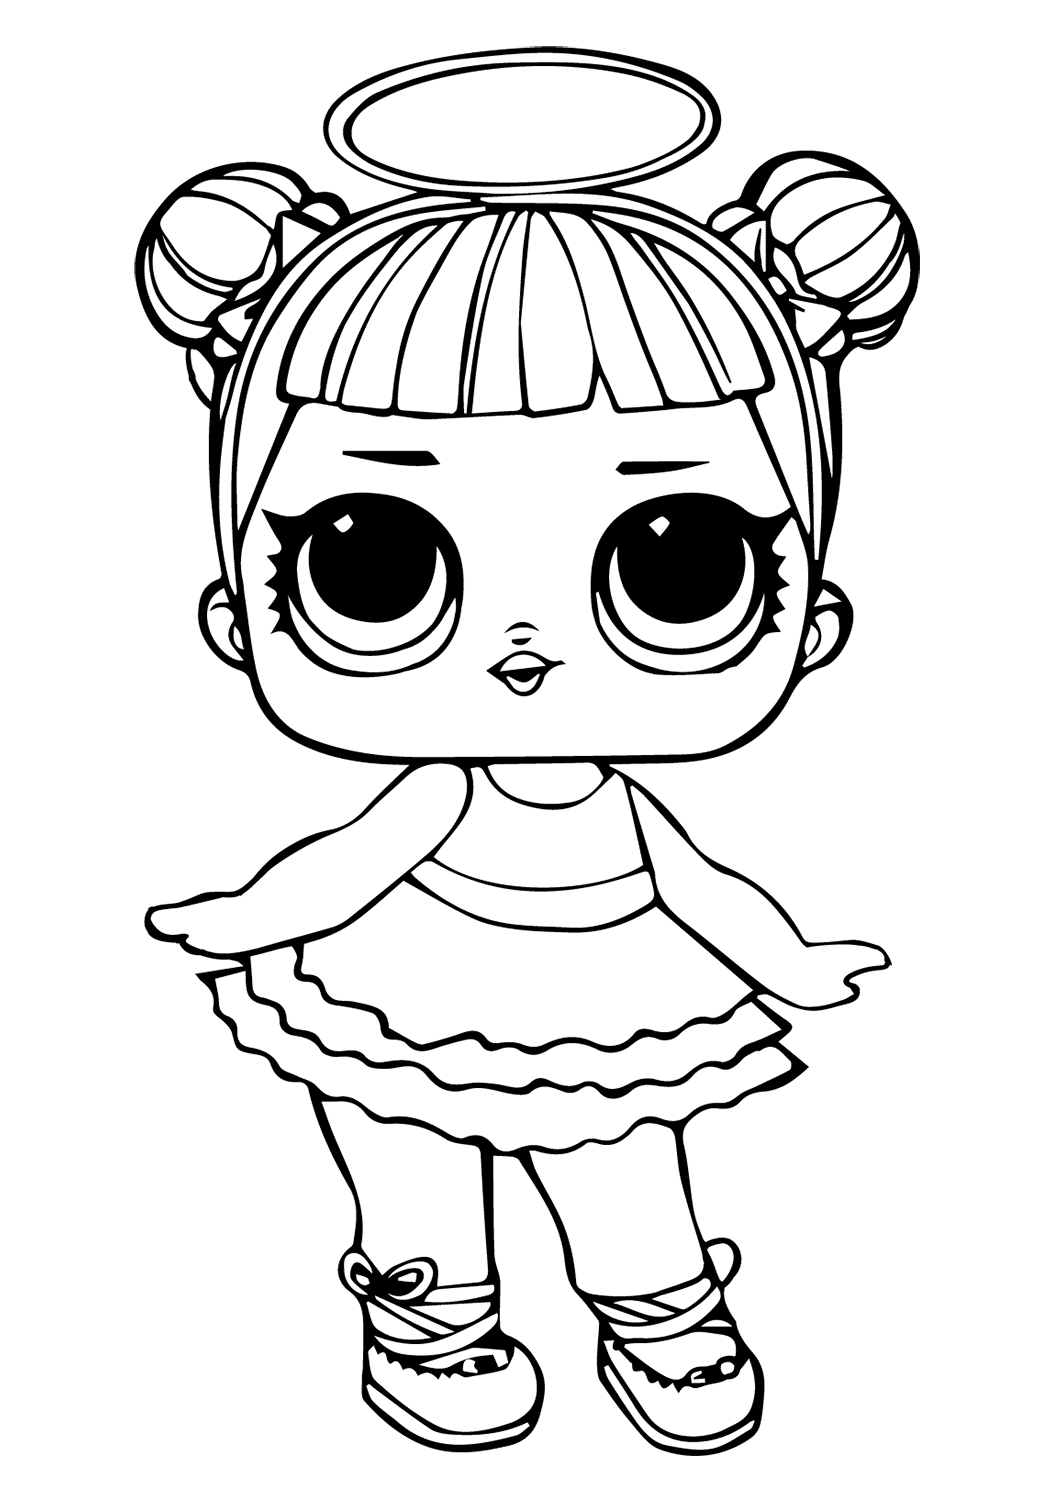 Sugar Lol Doll Coloring Page   Free Printable Coloring Pages for Kids